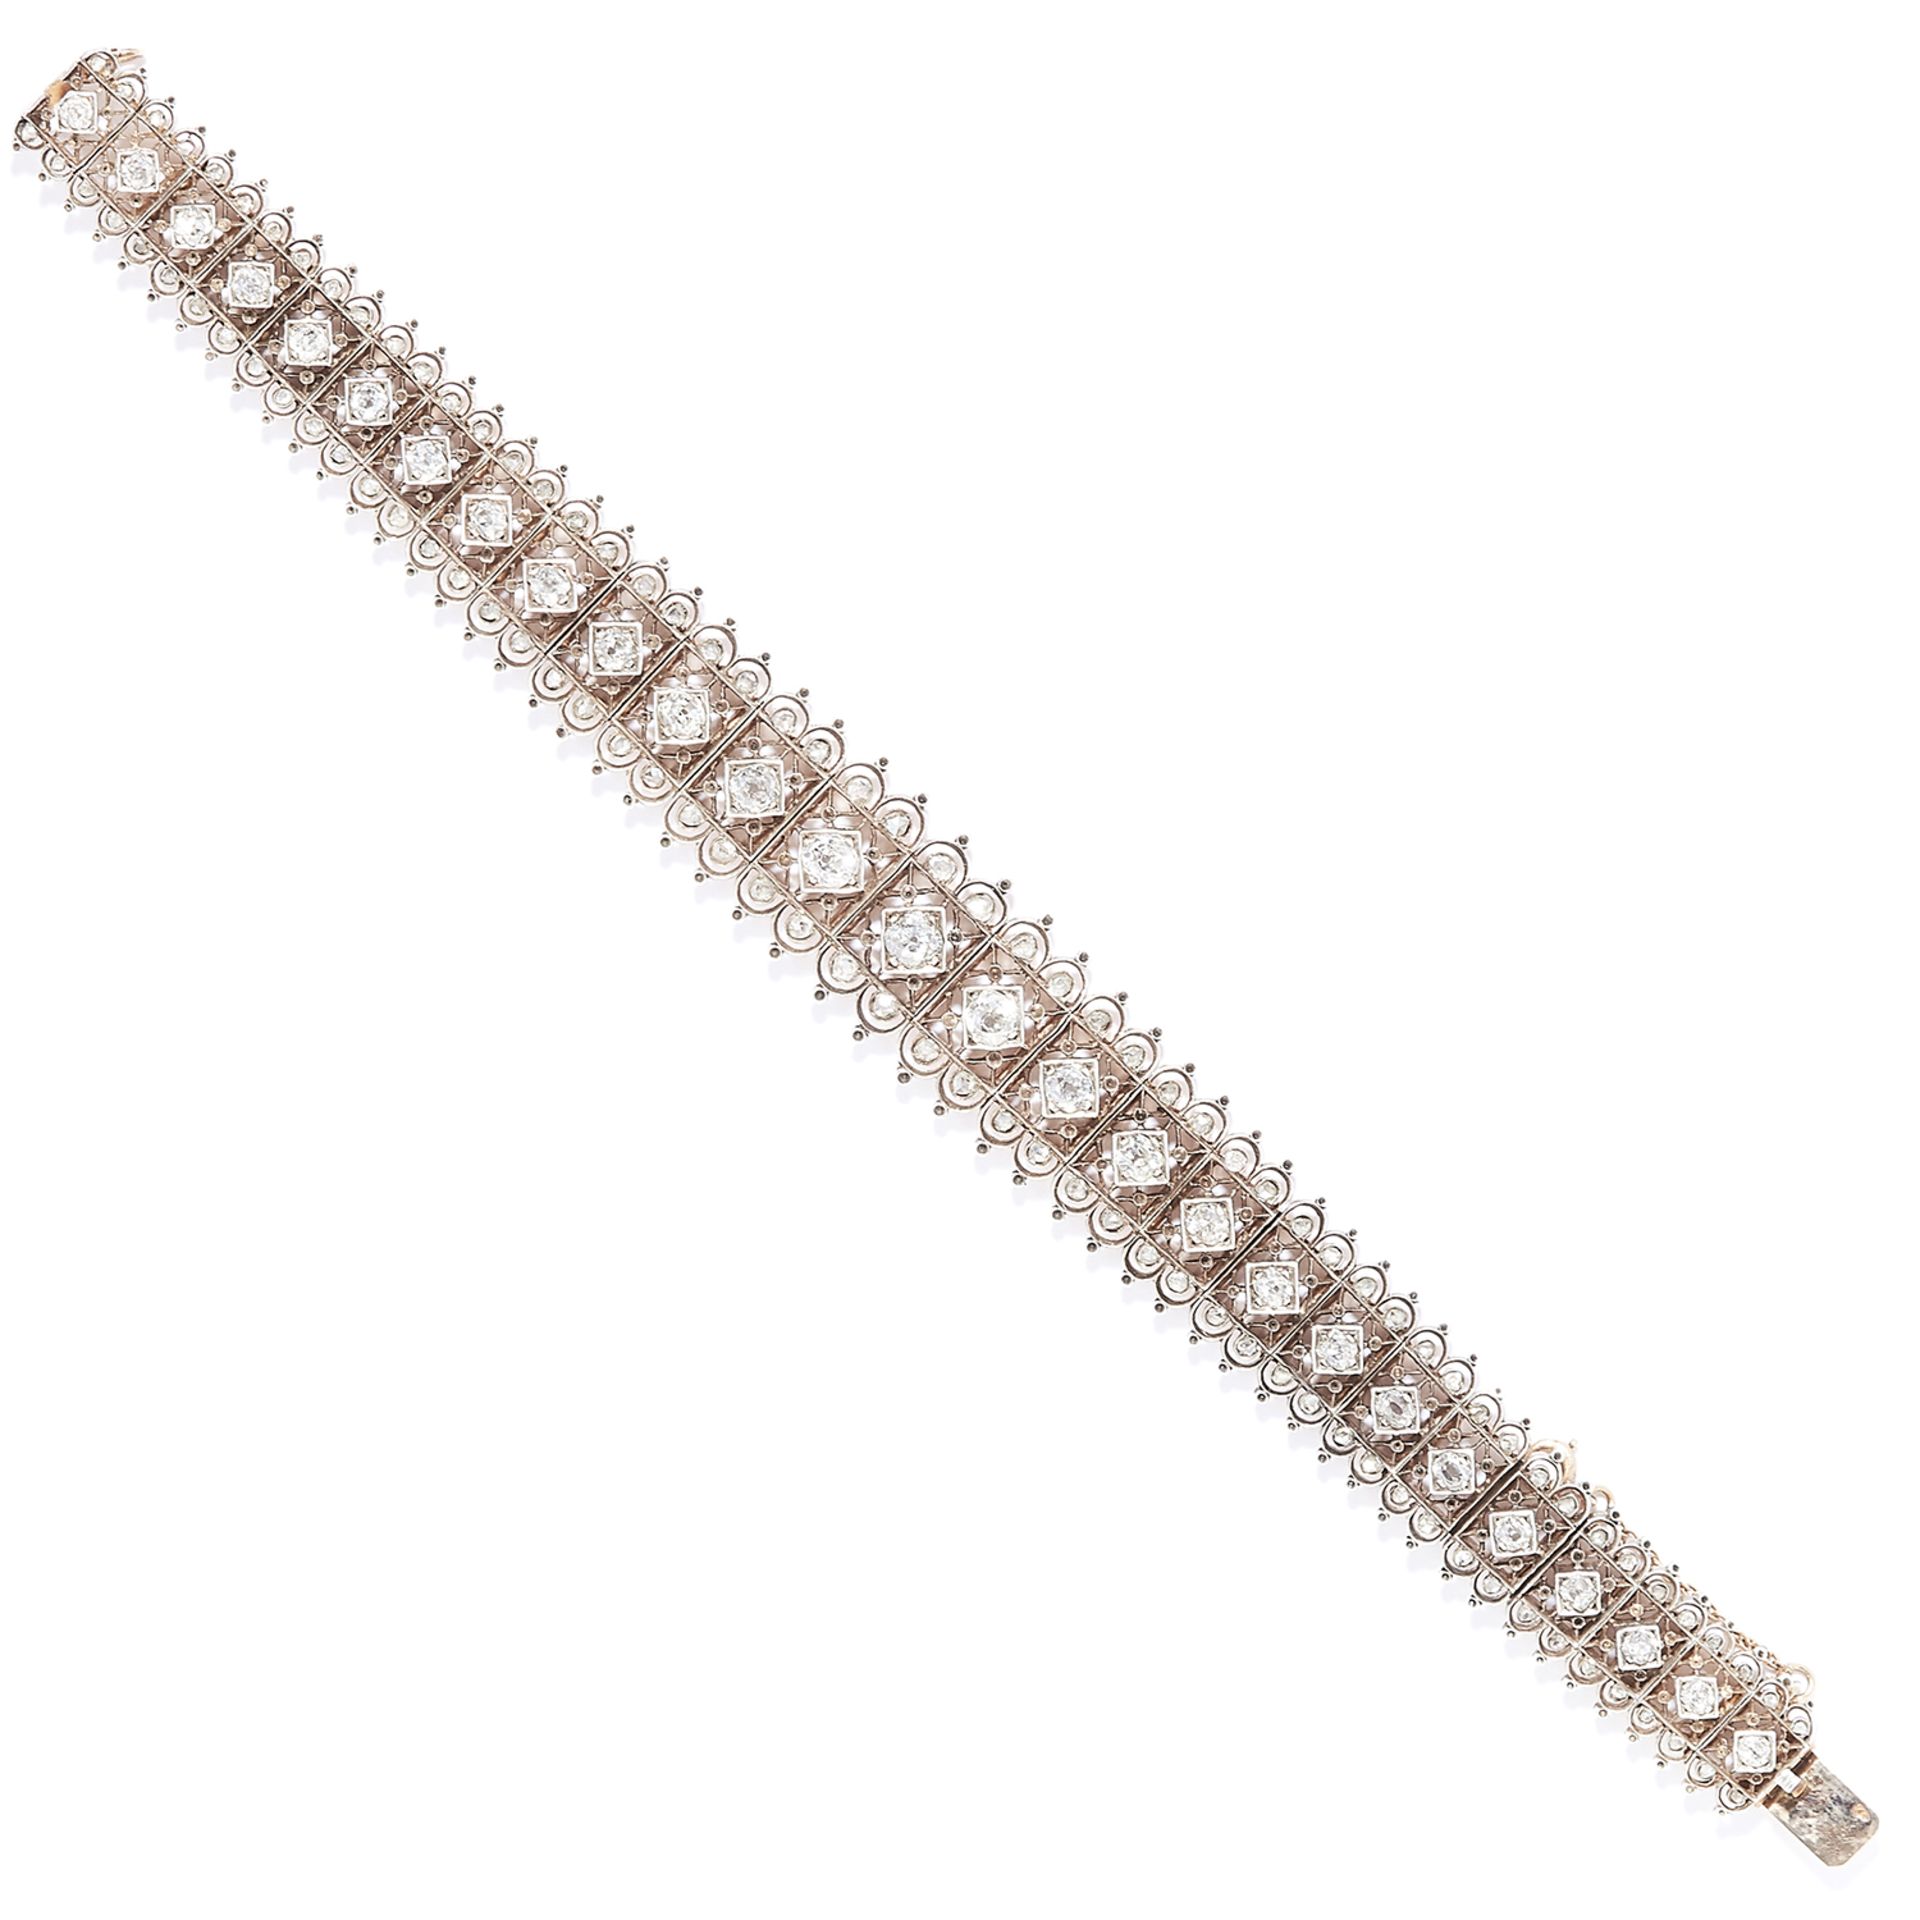 ANTIQUE DIAMOND BRACELET in high carat yellow gold, set with a row of old cut diamonds in detailed